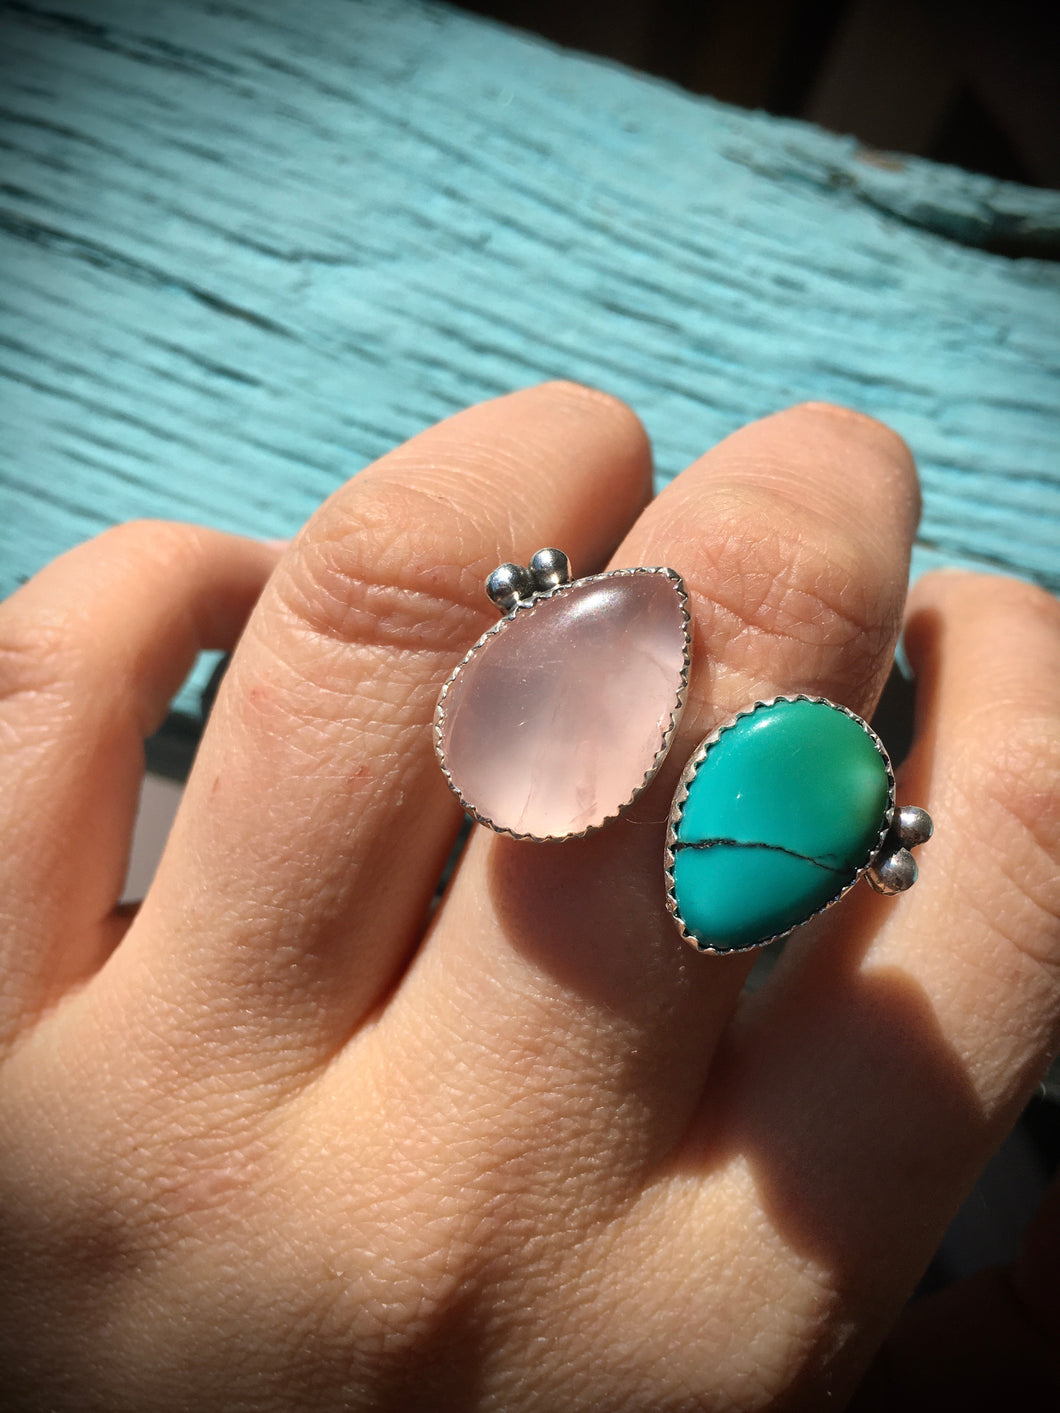 Shimmery rose quartz and teal Hubei turquoise double ring - size 8-9